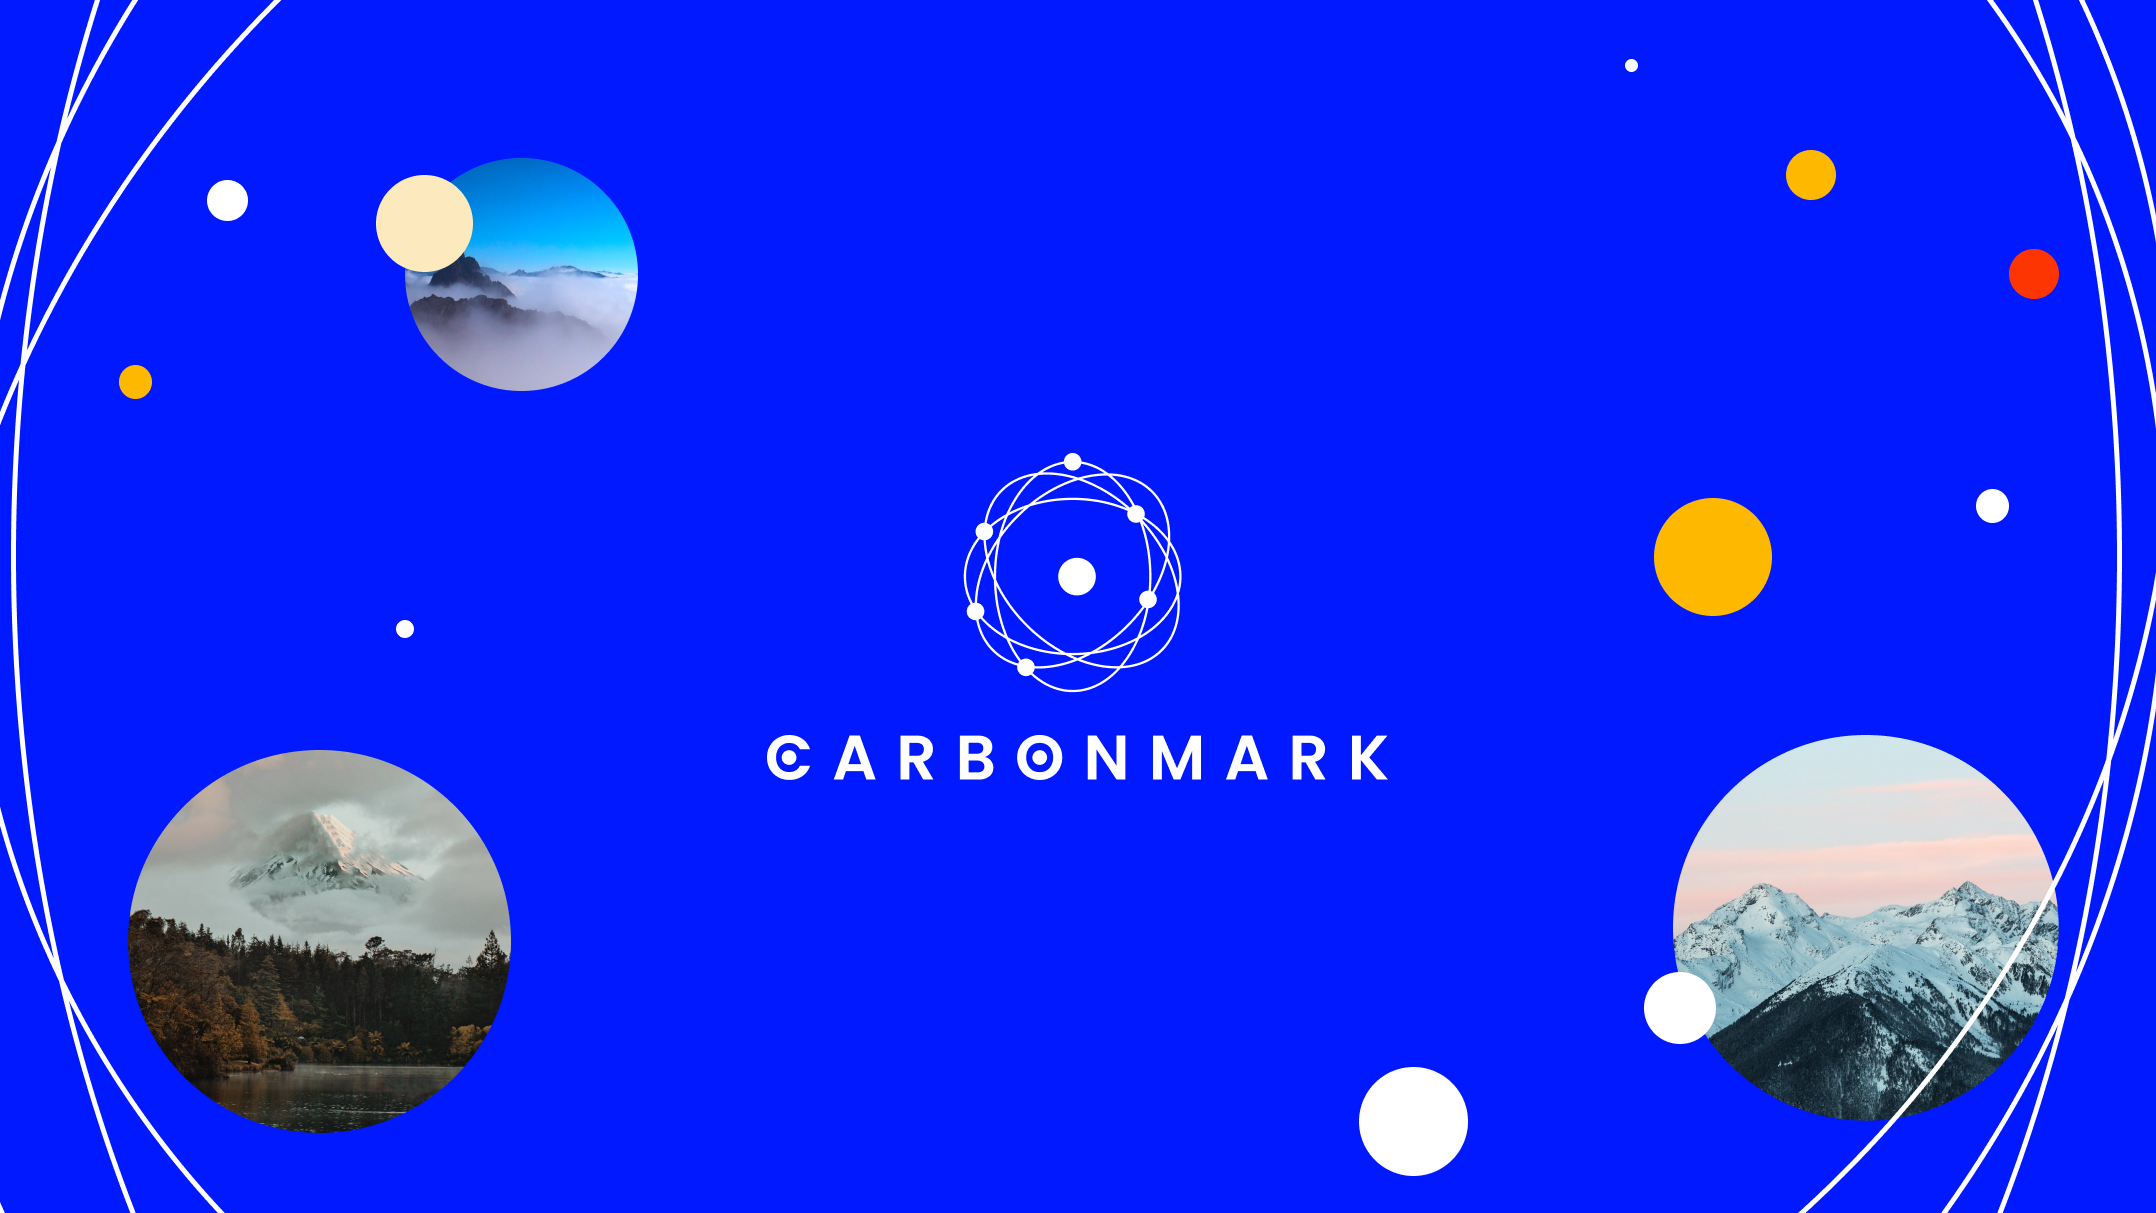 Carbonmark Launches the Universal Carbon Marketplace